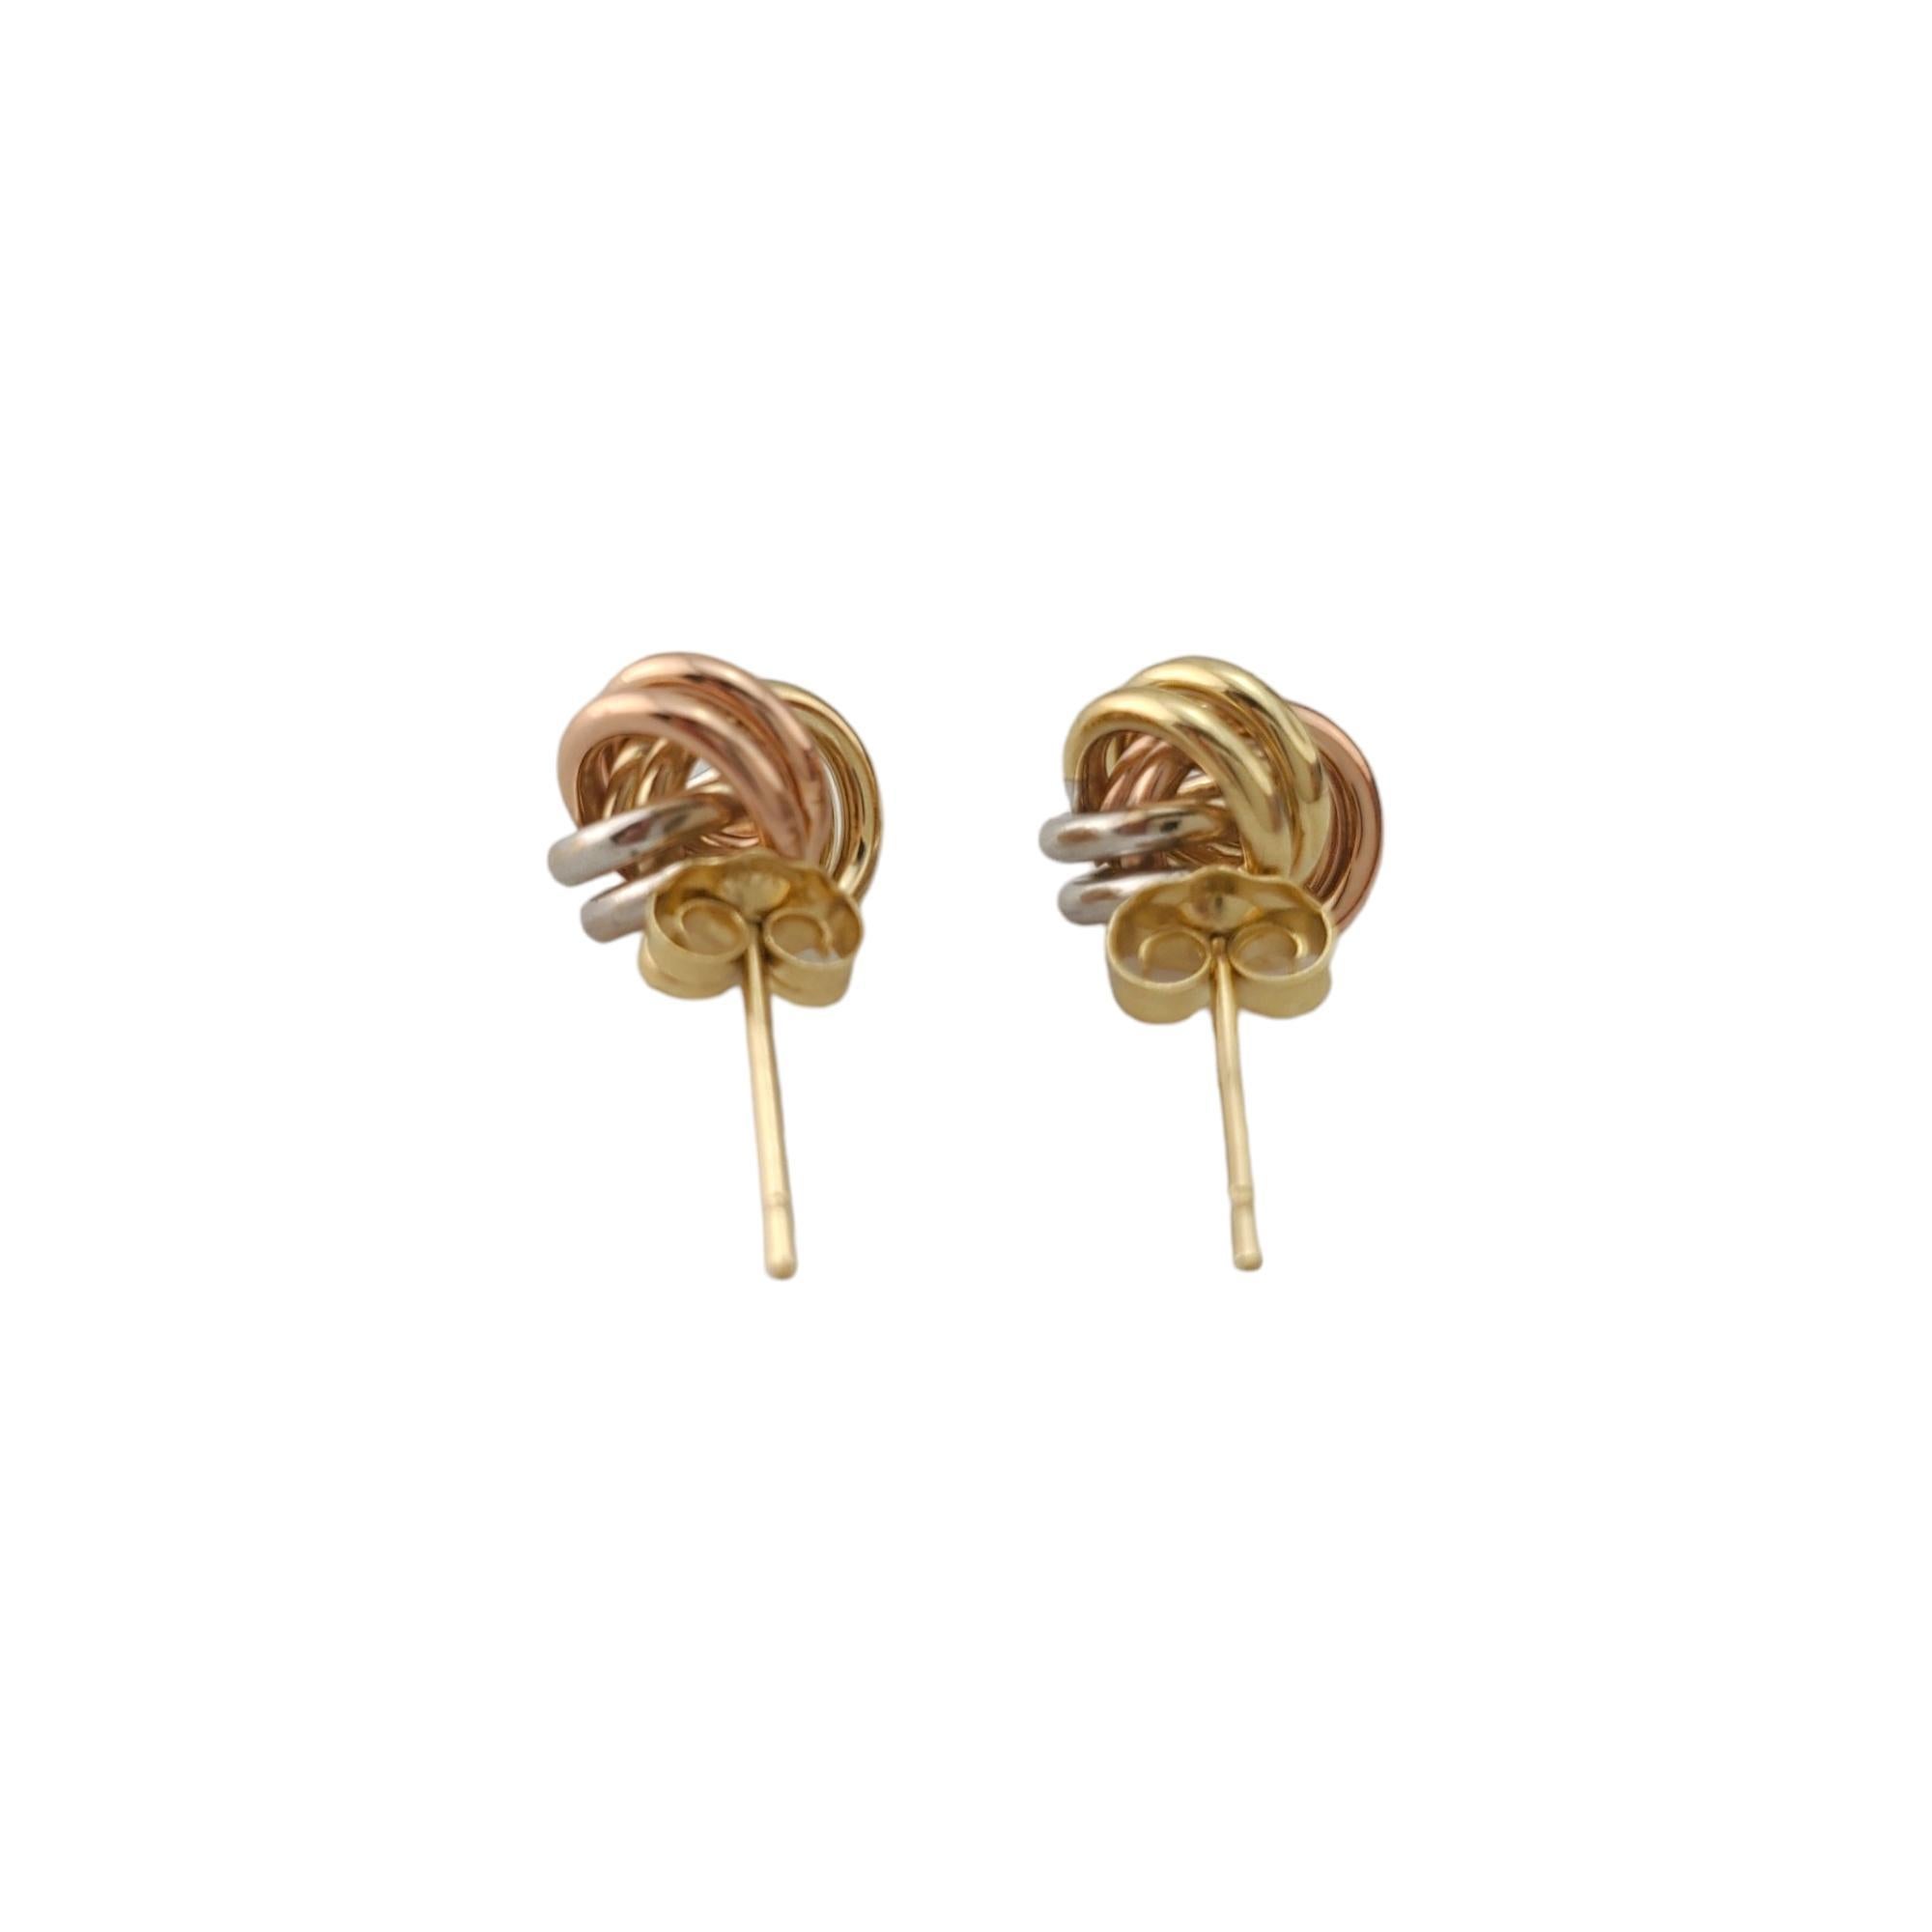 14K Tri Color Gold Knot Earrings

Stud earrings with knot design in 14K yellow, white and rose gold.

Hallmark: 14K 

Weight: 1.1 g/ 0.7 dwt.

Size: 9.4 mm X 8.1 mm X 7.1 mm

Very good condition, professionally polished.

Will come packaged in a